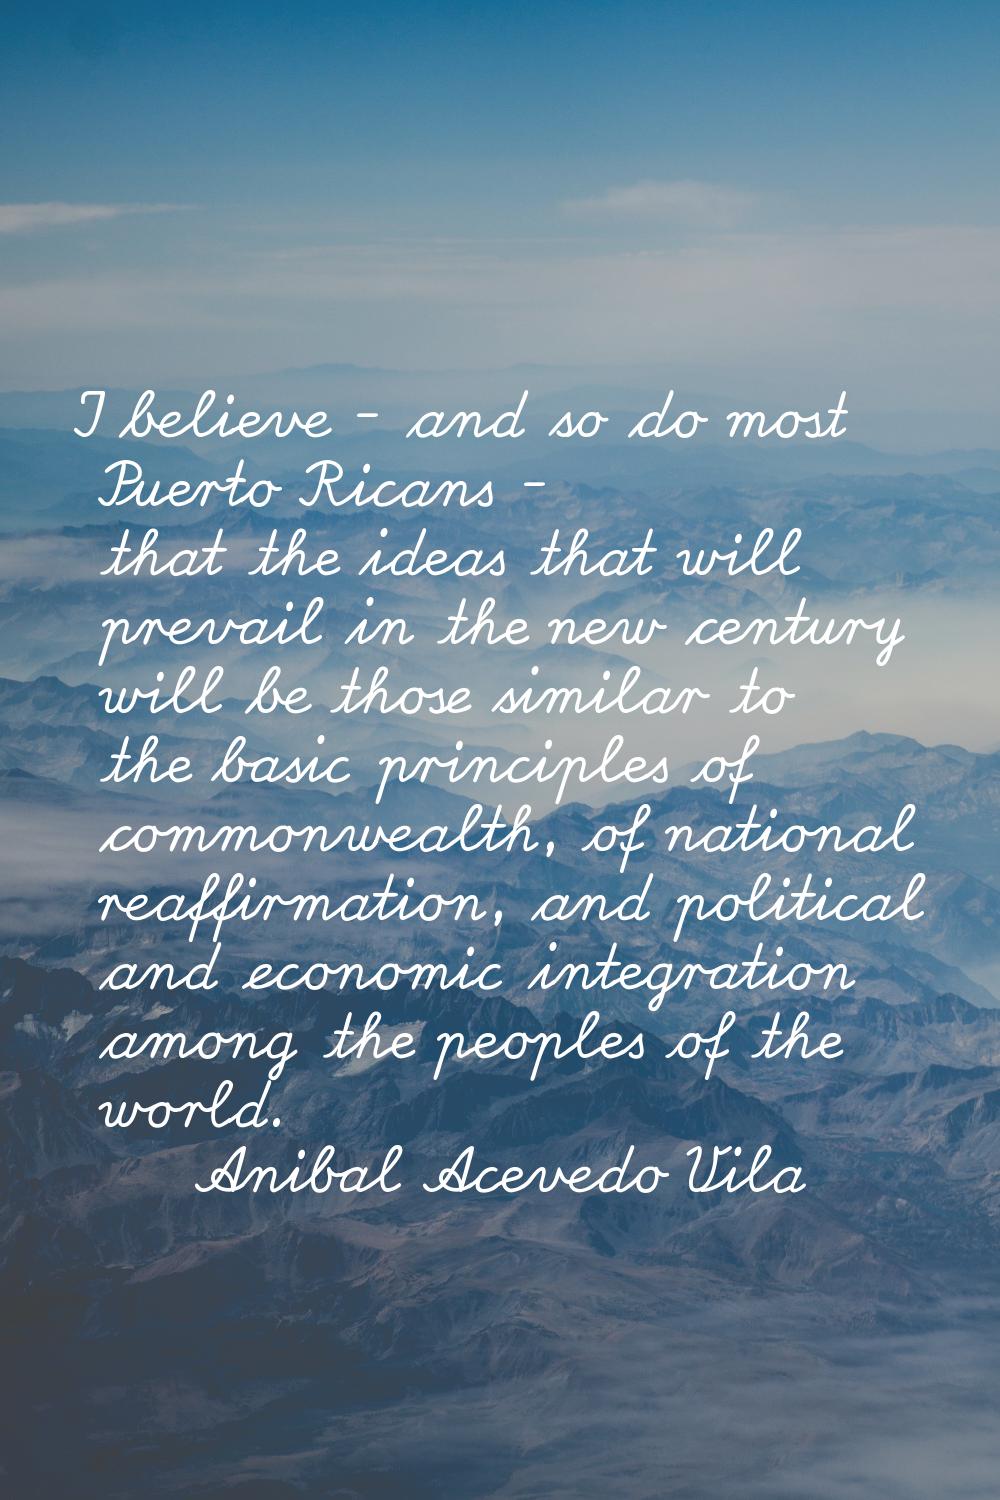 I believe - and so do most Puerto Ricans - that the ideas that will prevail in the new century will